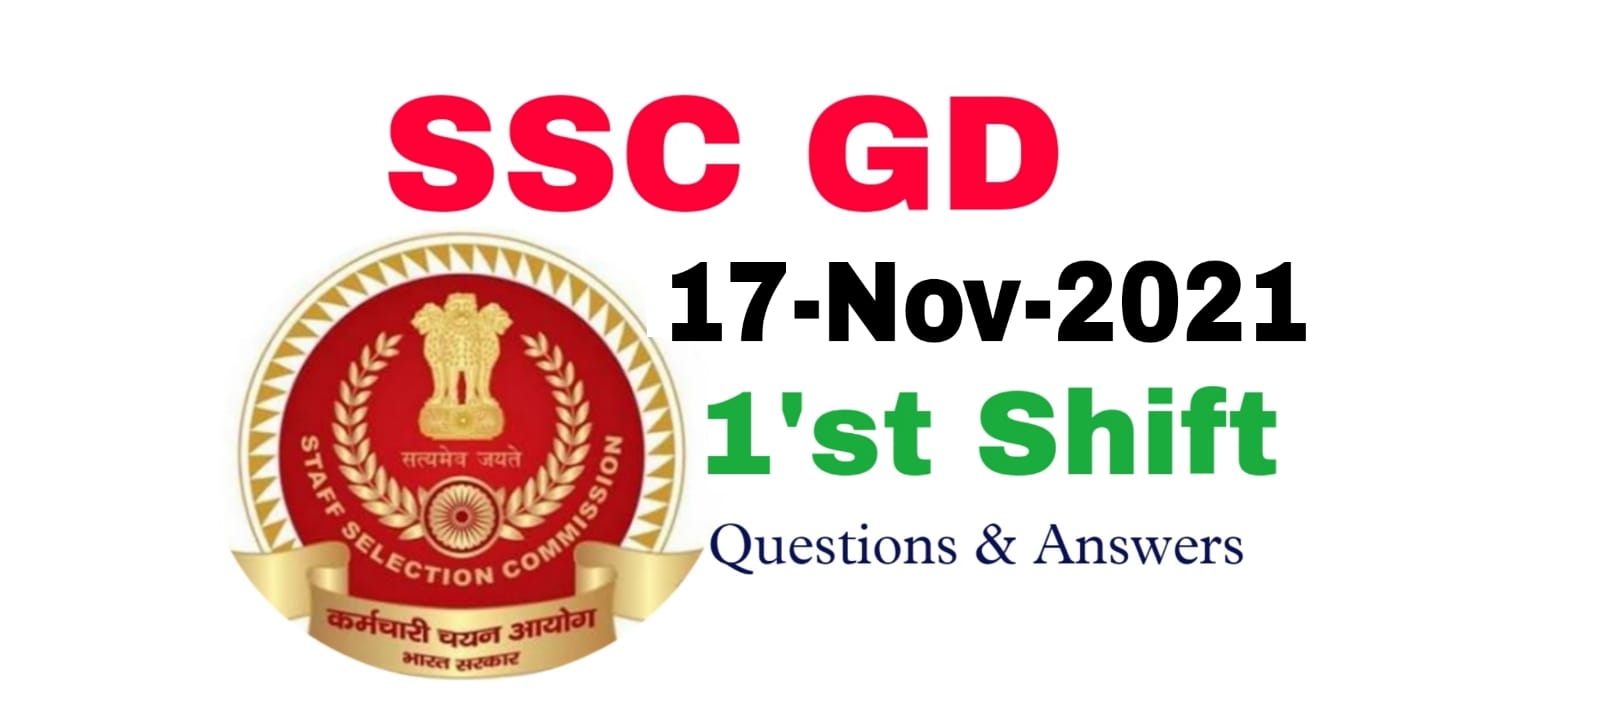 SSC GD 17 November 2021 1'st Shift Questions and Answers